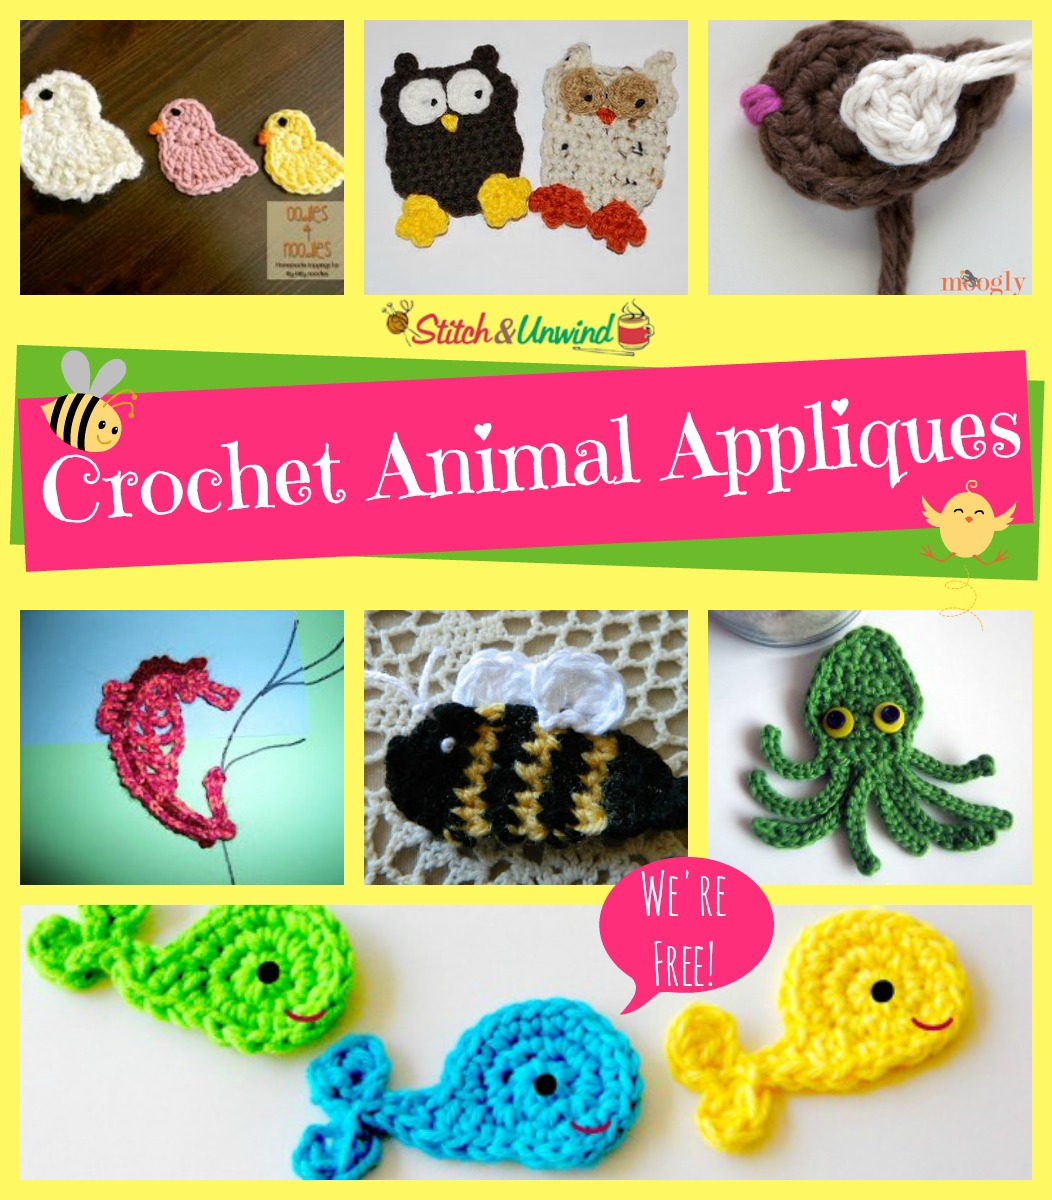 Free Crochet Applique Patterns Add Flair To Your Afghans Free Crochet Applique Patterns Stitch